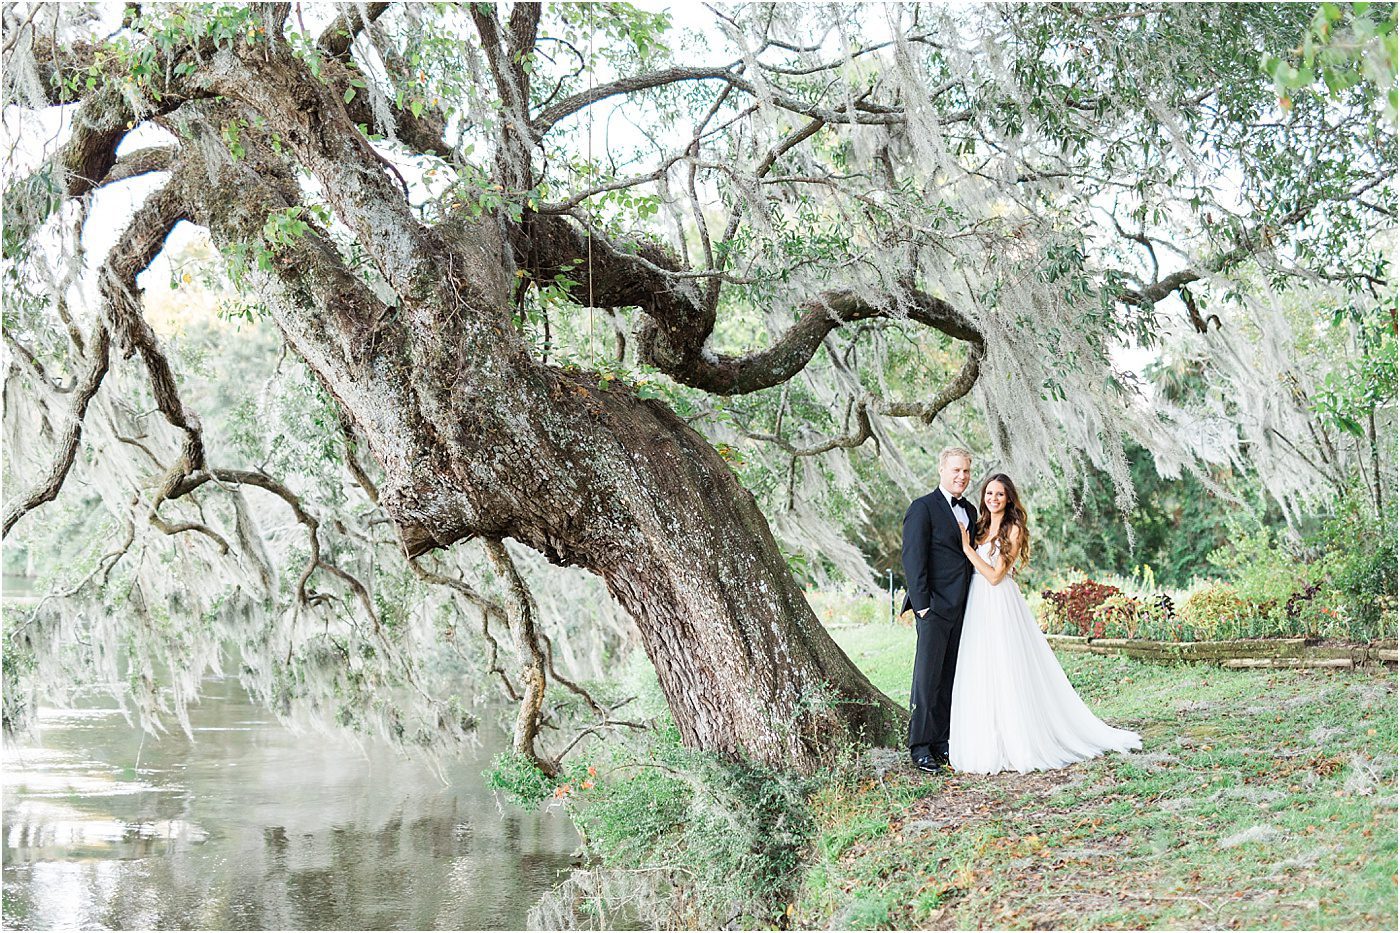 Intimate elopement at Magnolia Plantation by Catherine Ann Photography and Love Letter Gray